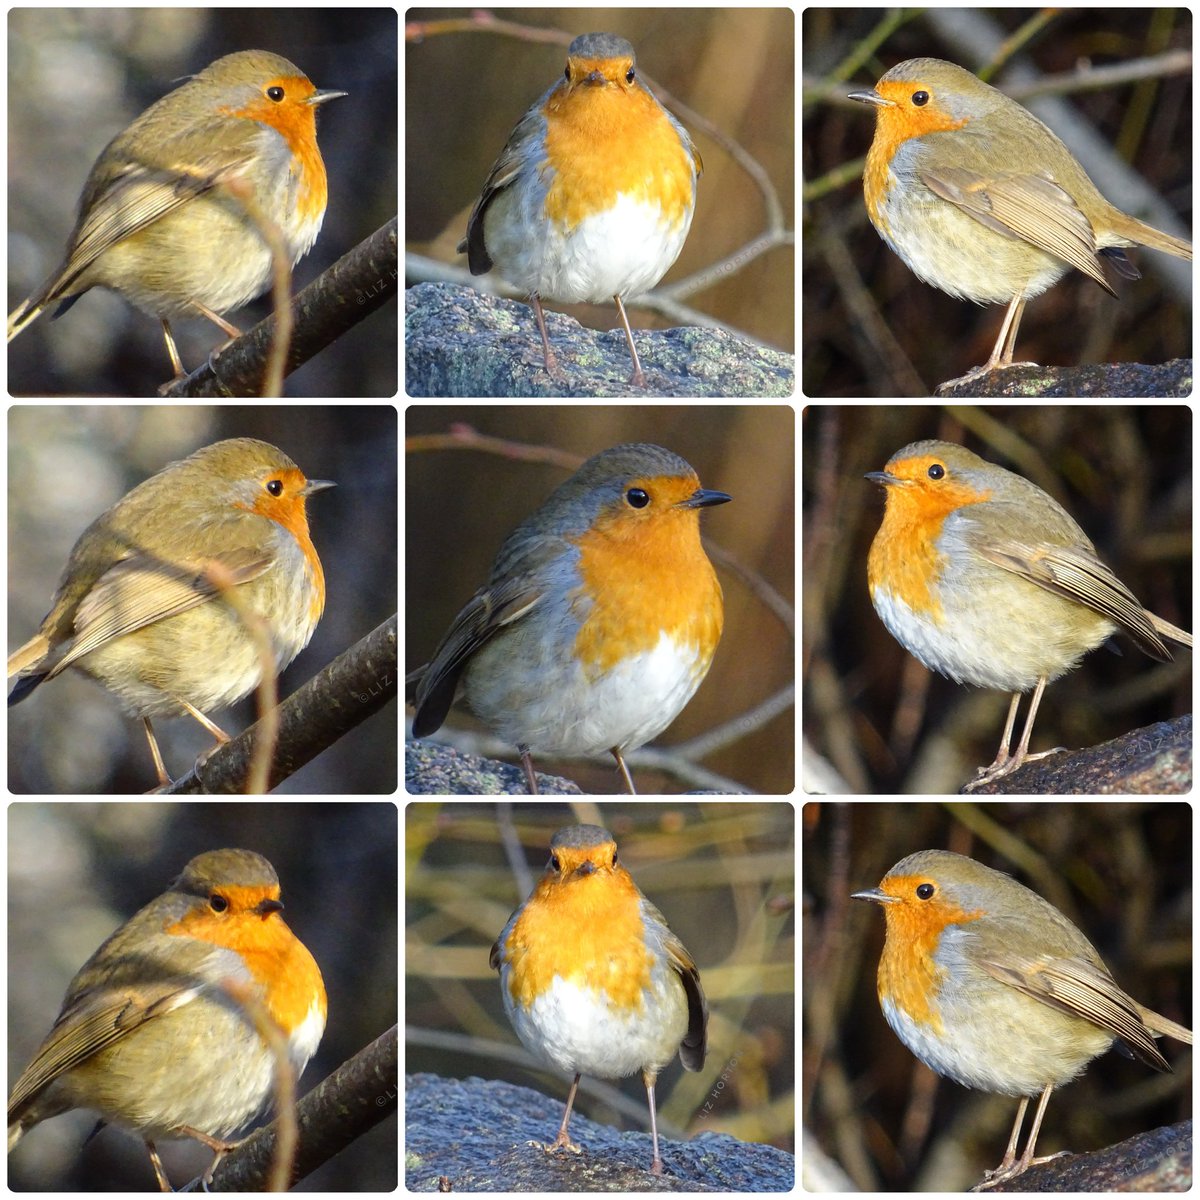 Fluffed up to keep warm
And looking lovely
'Art thou the bird
Whom Man #loves best,
The pious bird
With the scarlet breast,
Our little English #Robin.' 🥰
William #Wordsworth #quote
#nature #wildlife #birds #photography
#birdwatching #birdphotography
#art #naturelovers .. 🍃🧡🕊